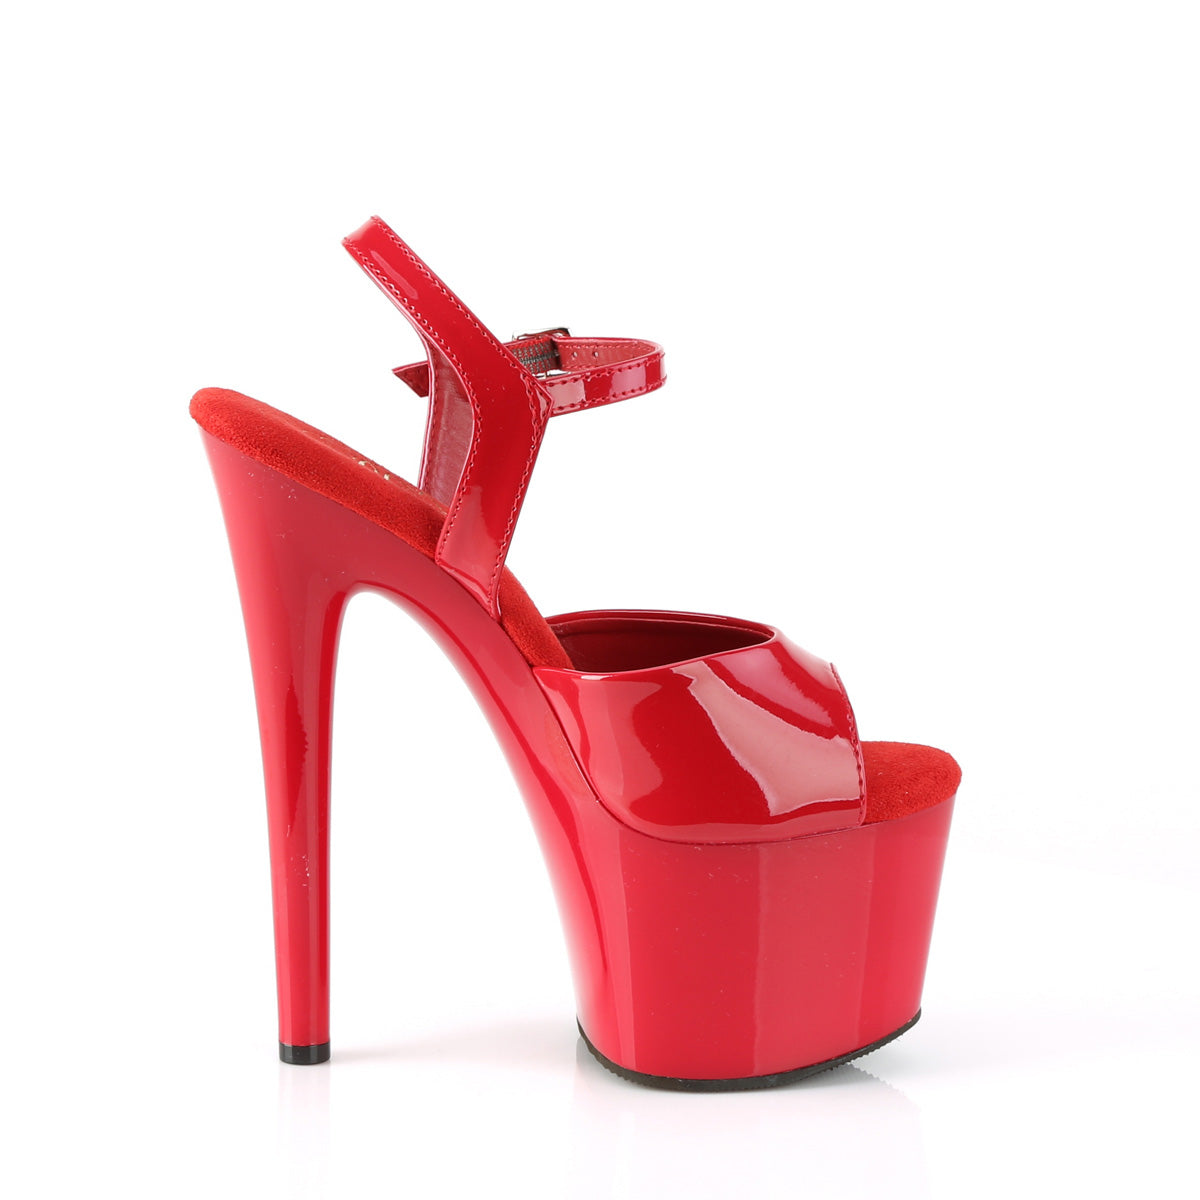 7 Inch Heel PASSION-709 Red Pat